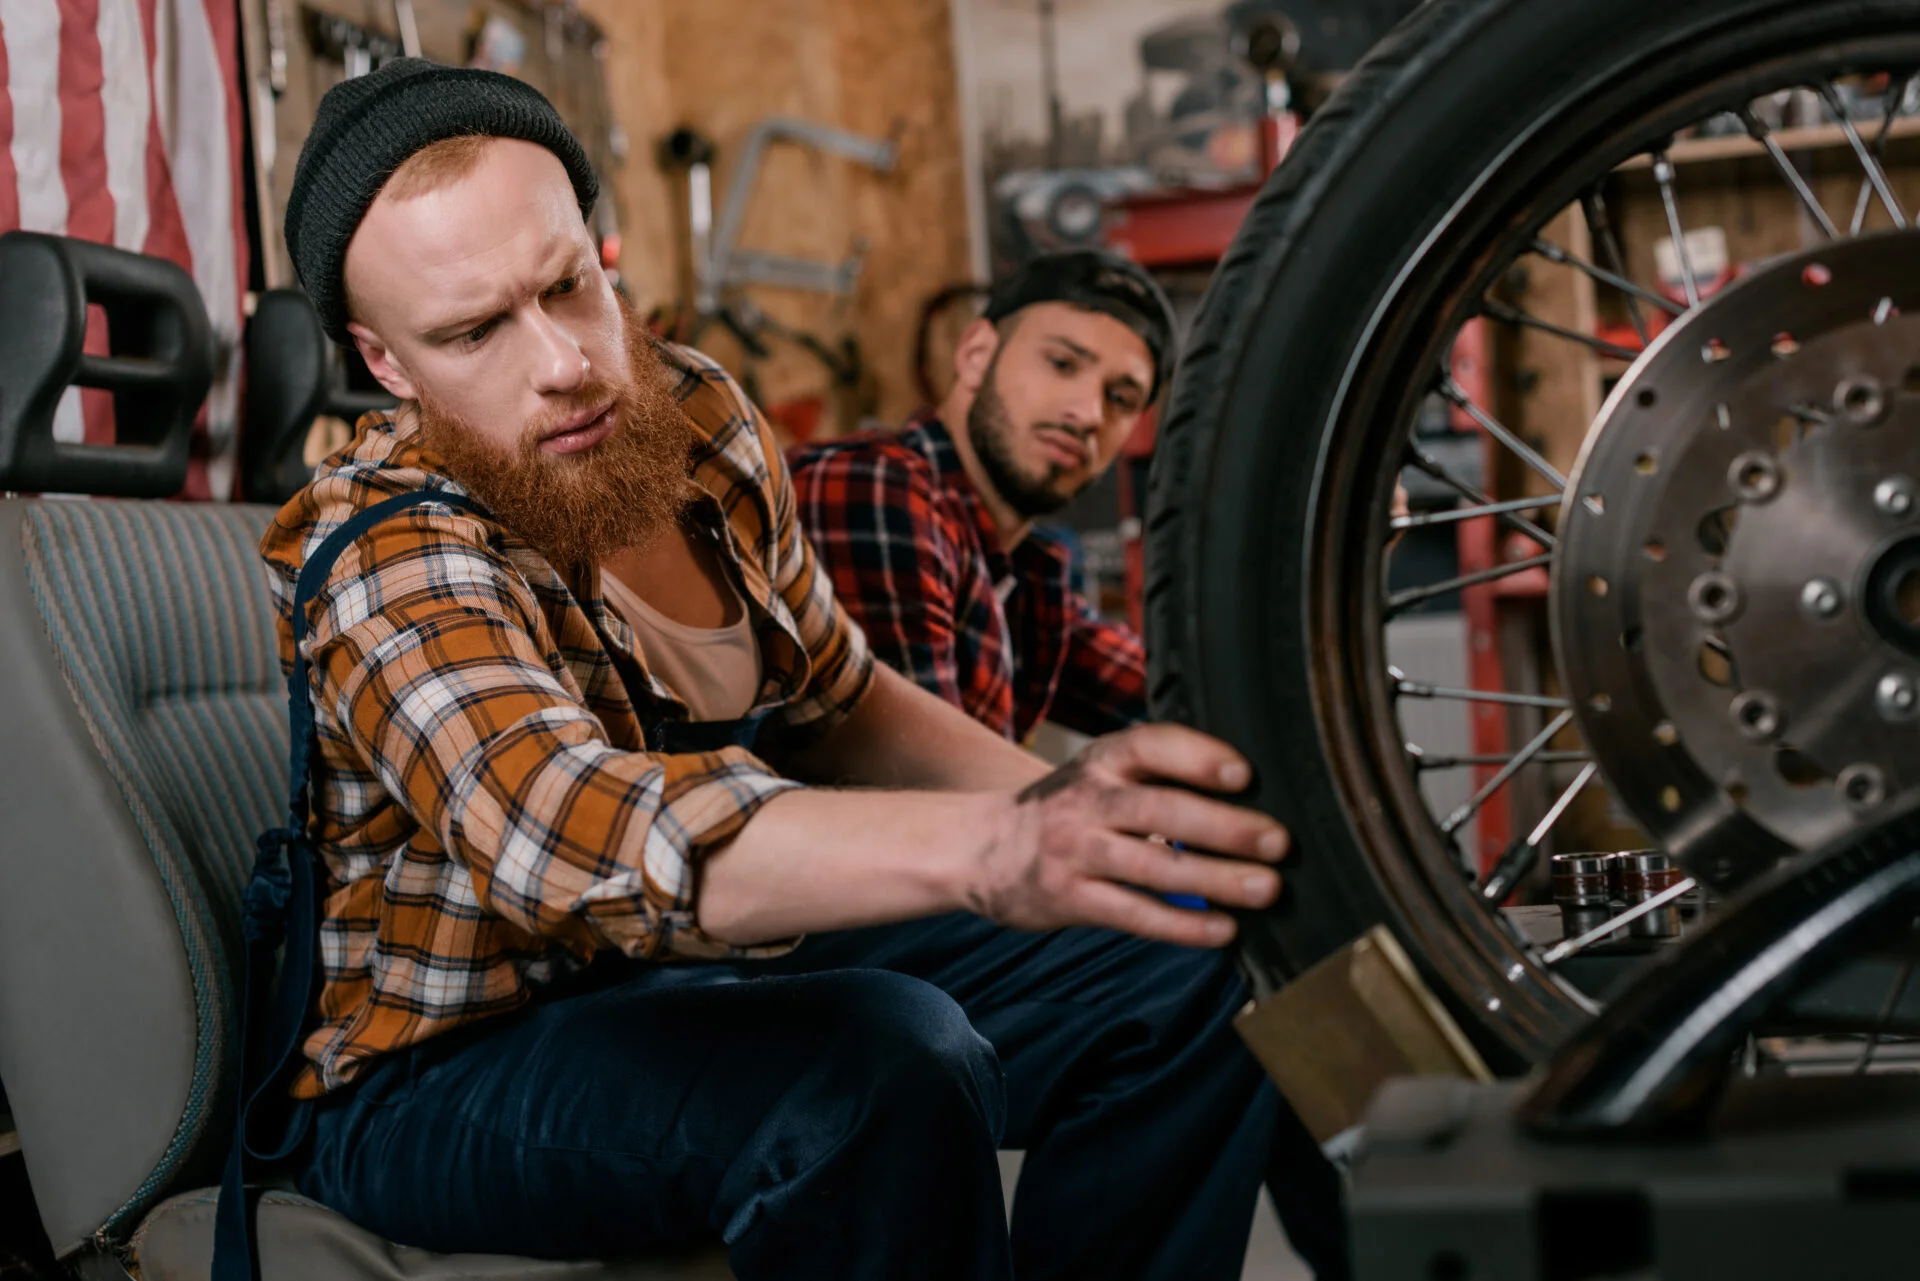 Handsome redheaded man fixing a bike in the shop